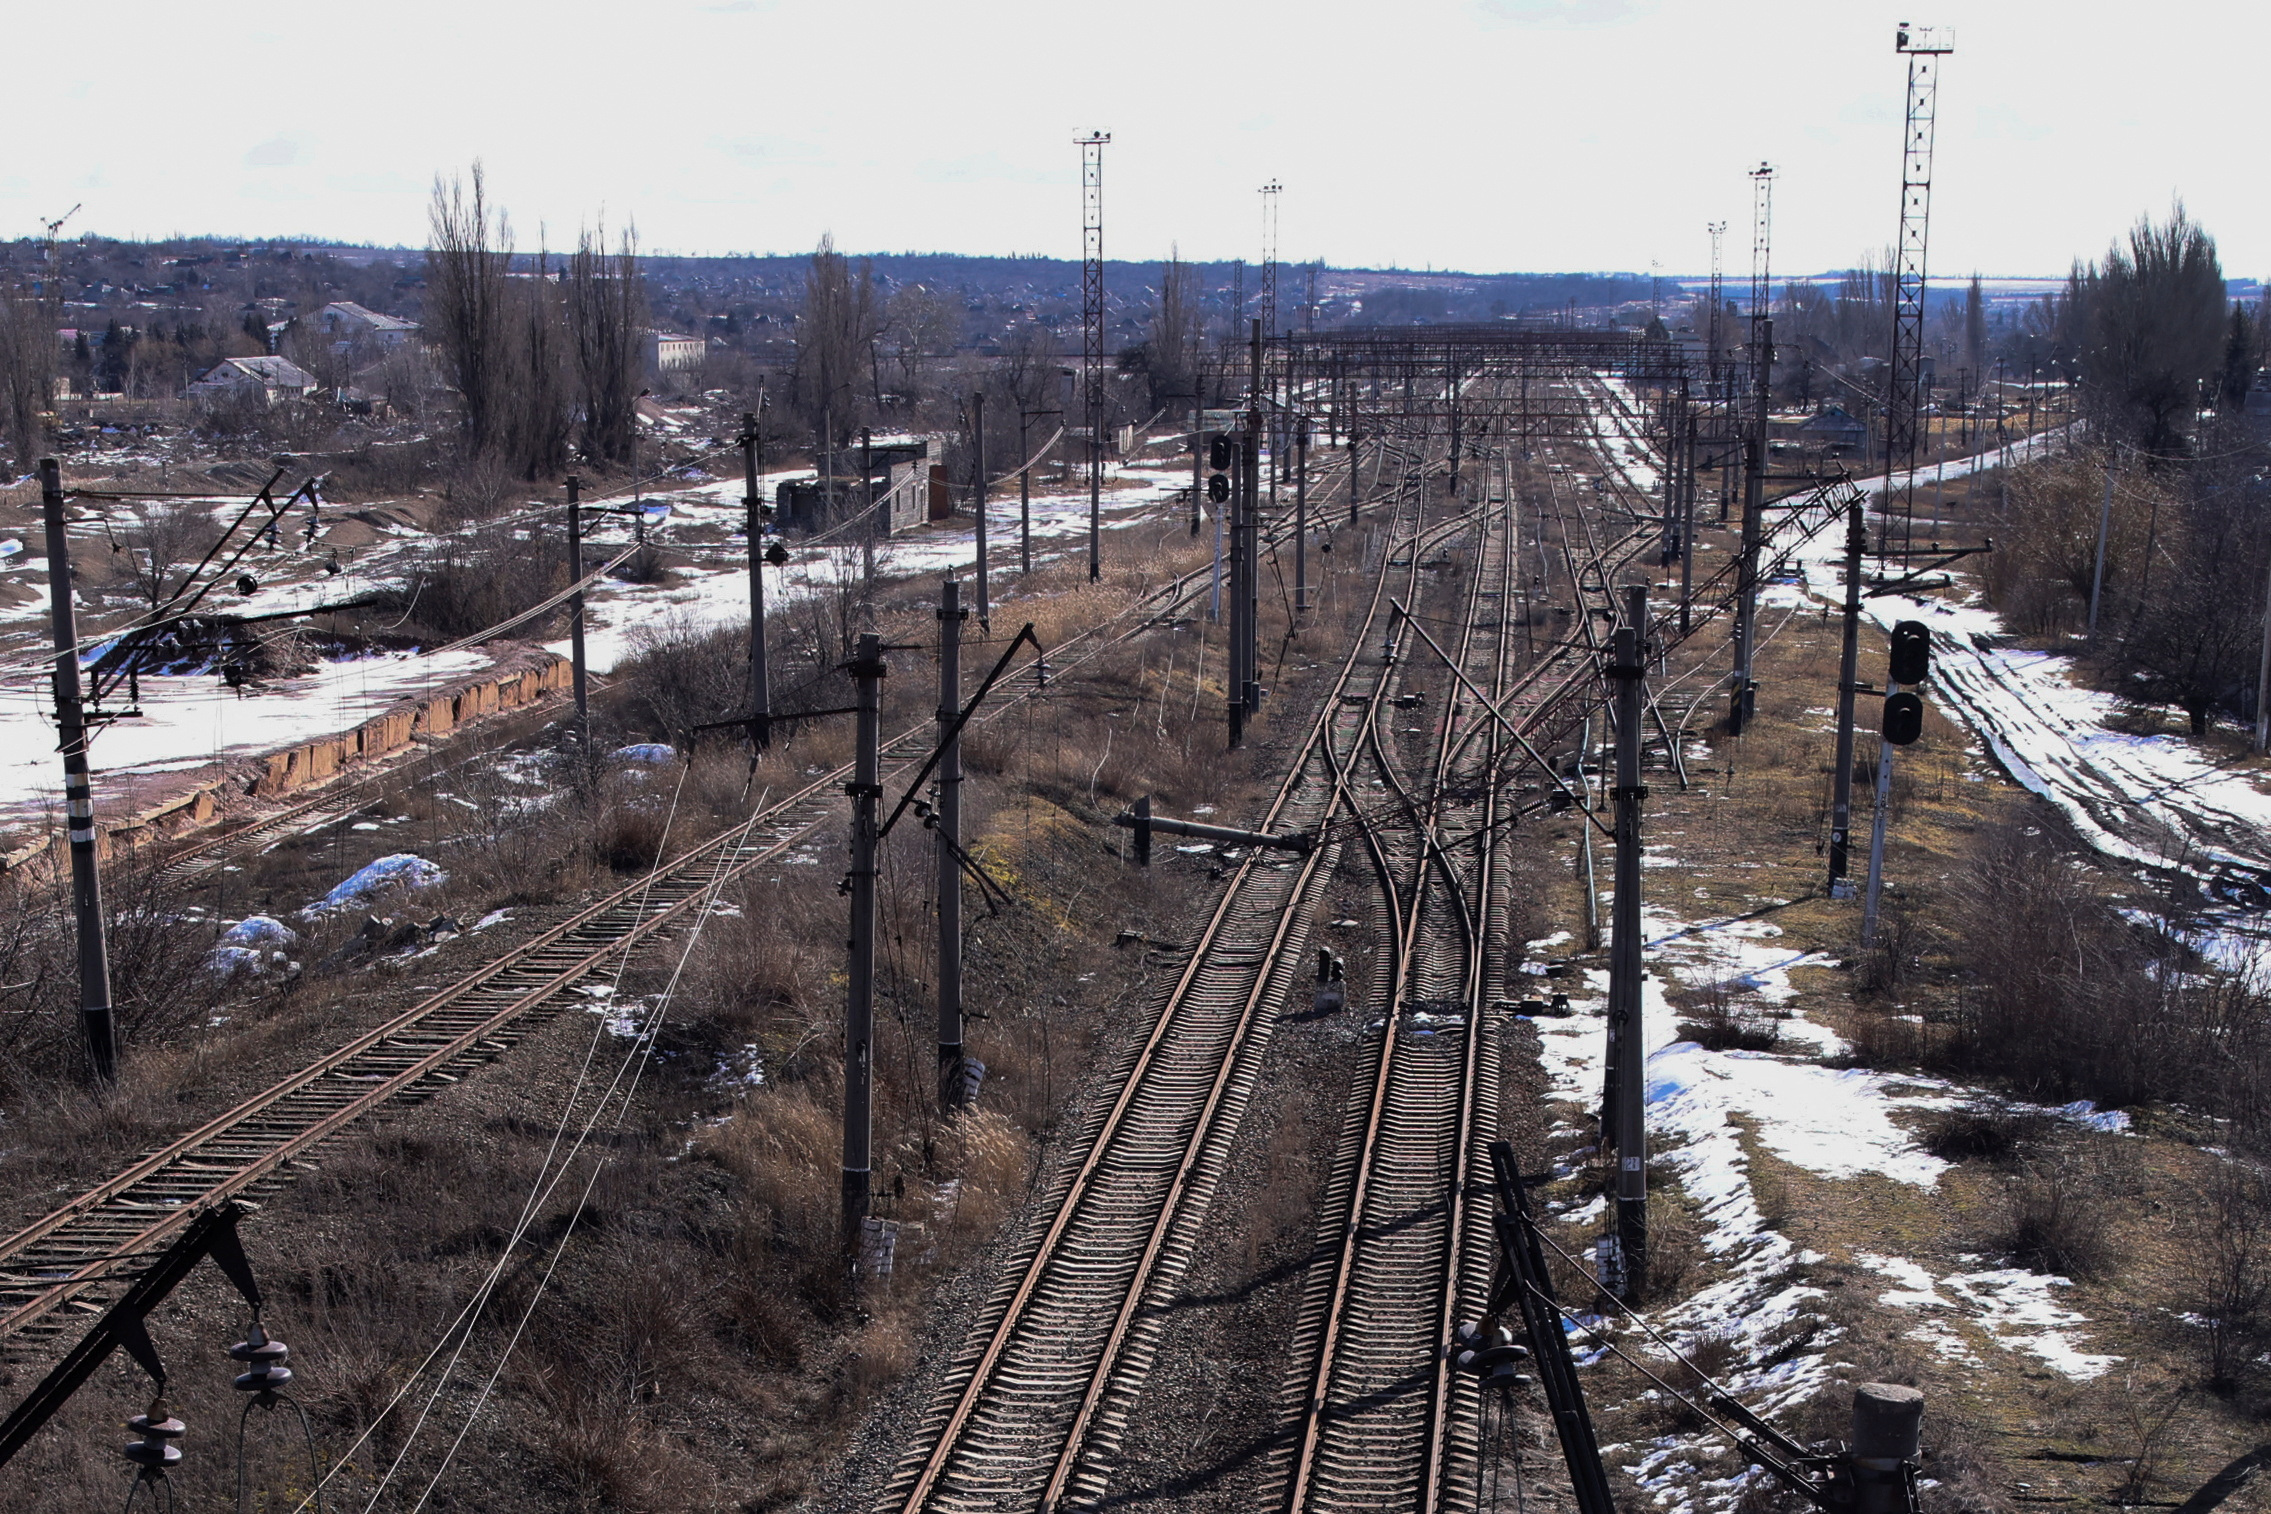 View shows damaged rail ways in the town of Siversk